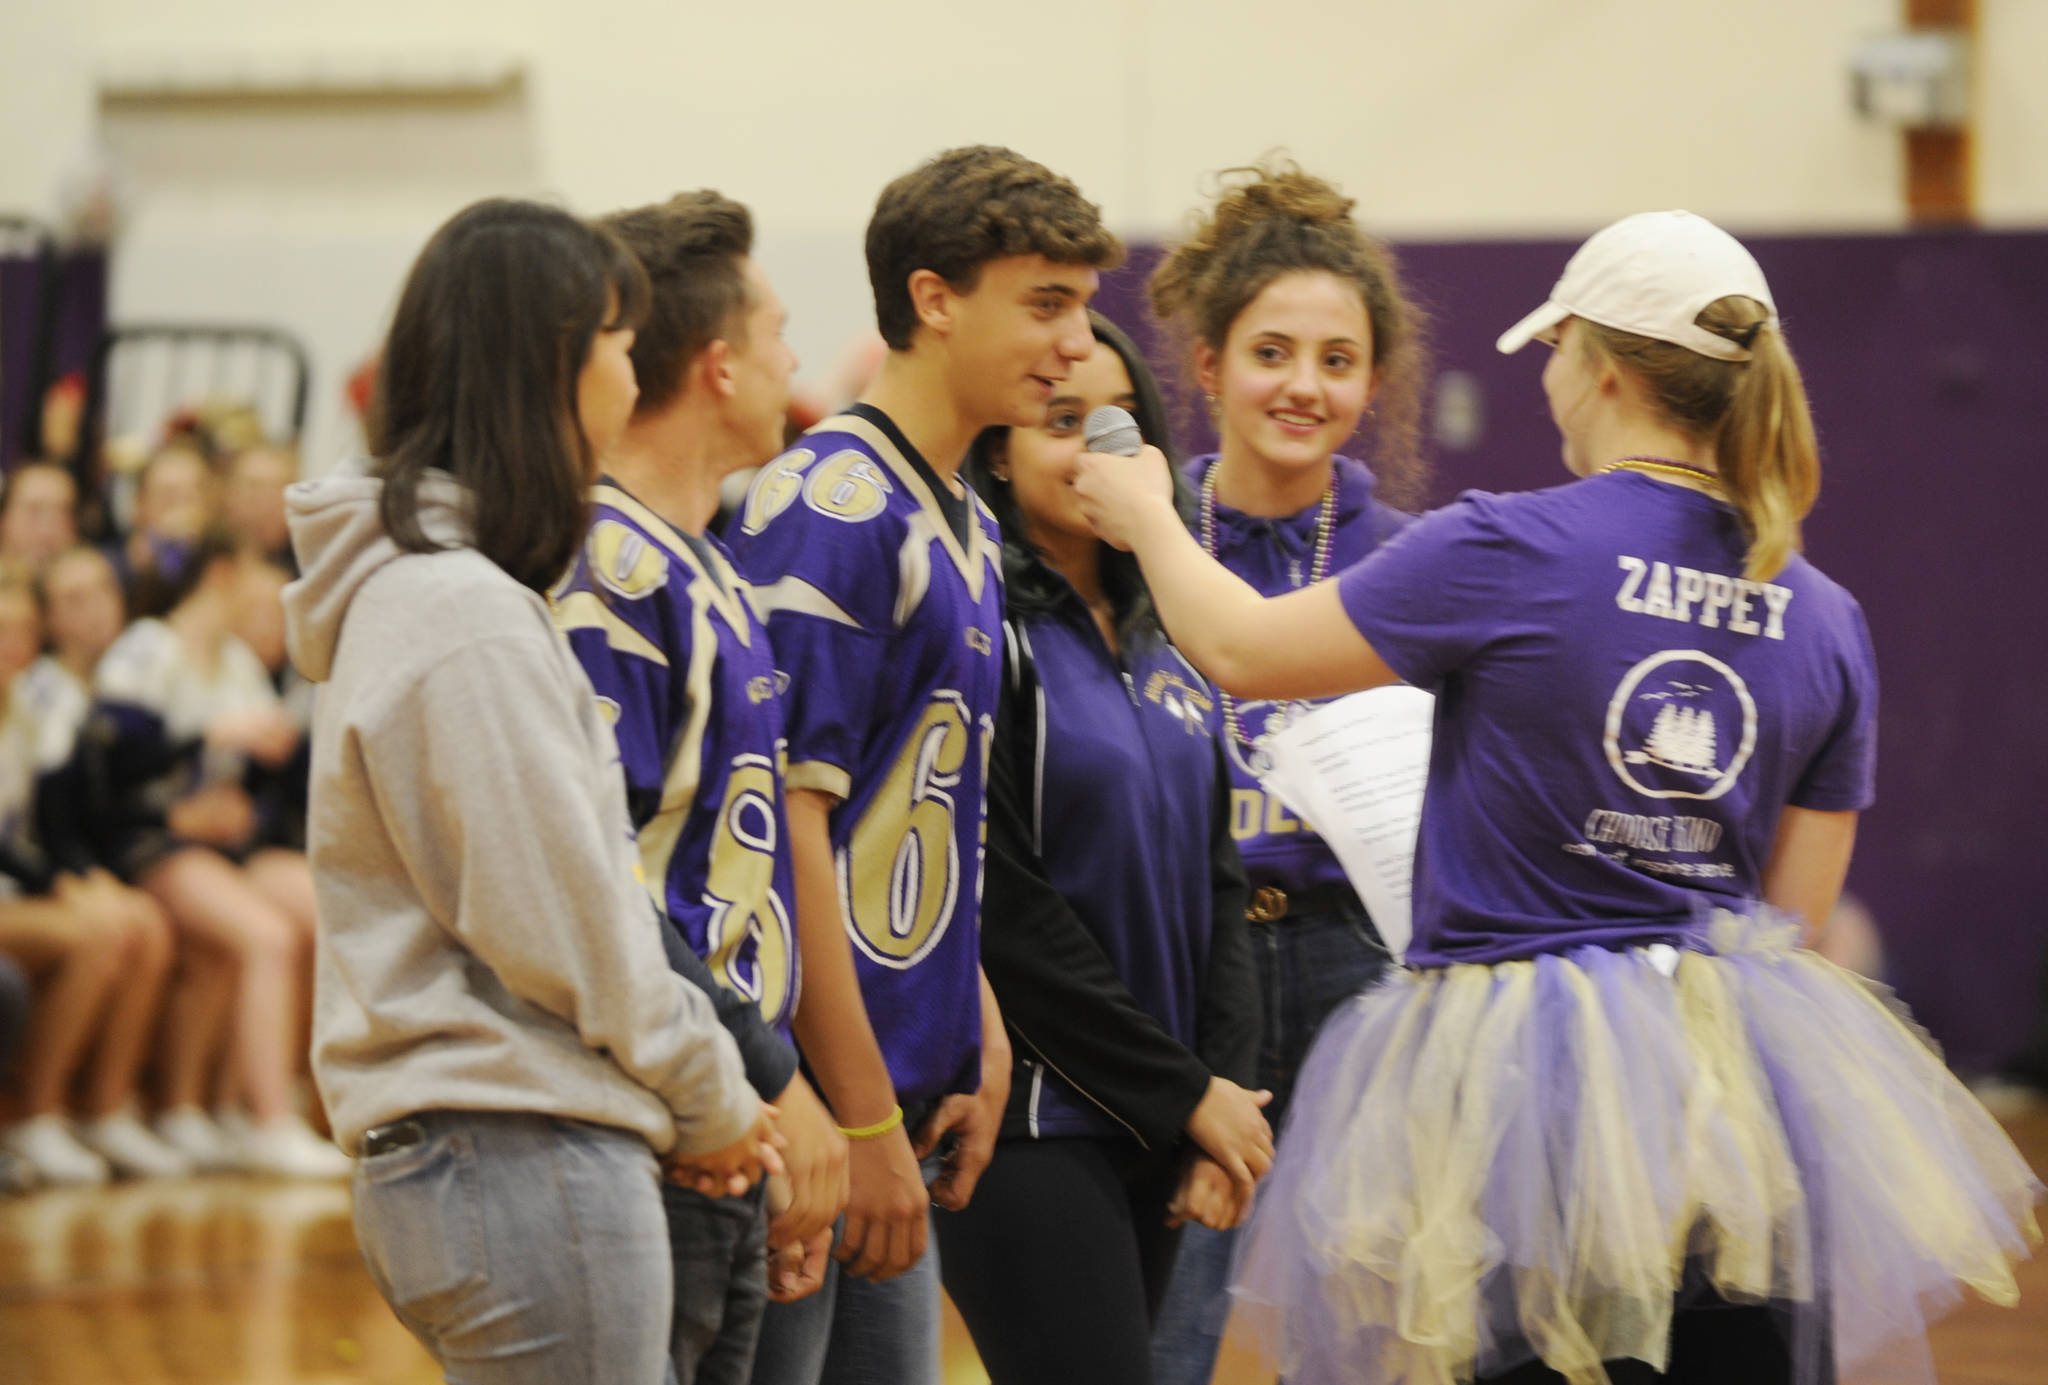 Saying hello to the Sequim High Homecoming assembly crowd are this year’s SHS exchange students: Khelea Cloetens and Mathys Tanche of Belgium, Rodrigo Silva Carrasco and Paula Martinez Saenz of Spain, Elisa Hieber of Germany, Isabella Lemos Platera of Brazil and Sofia Baruffi of Italy. Sequim Gazette photo by Michael Dashiell